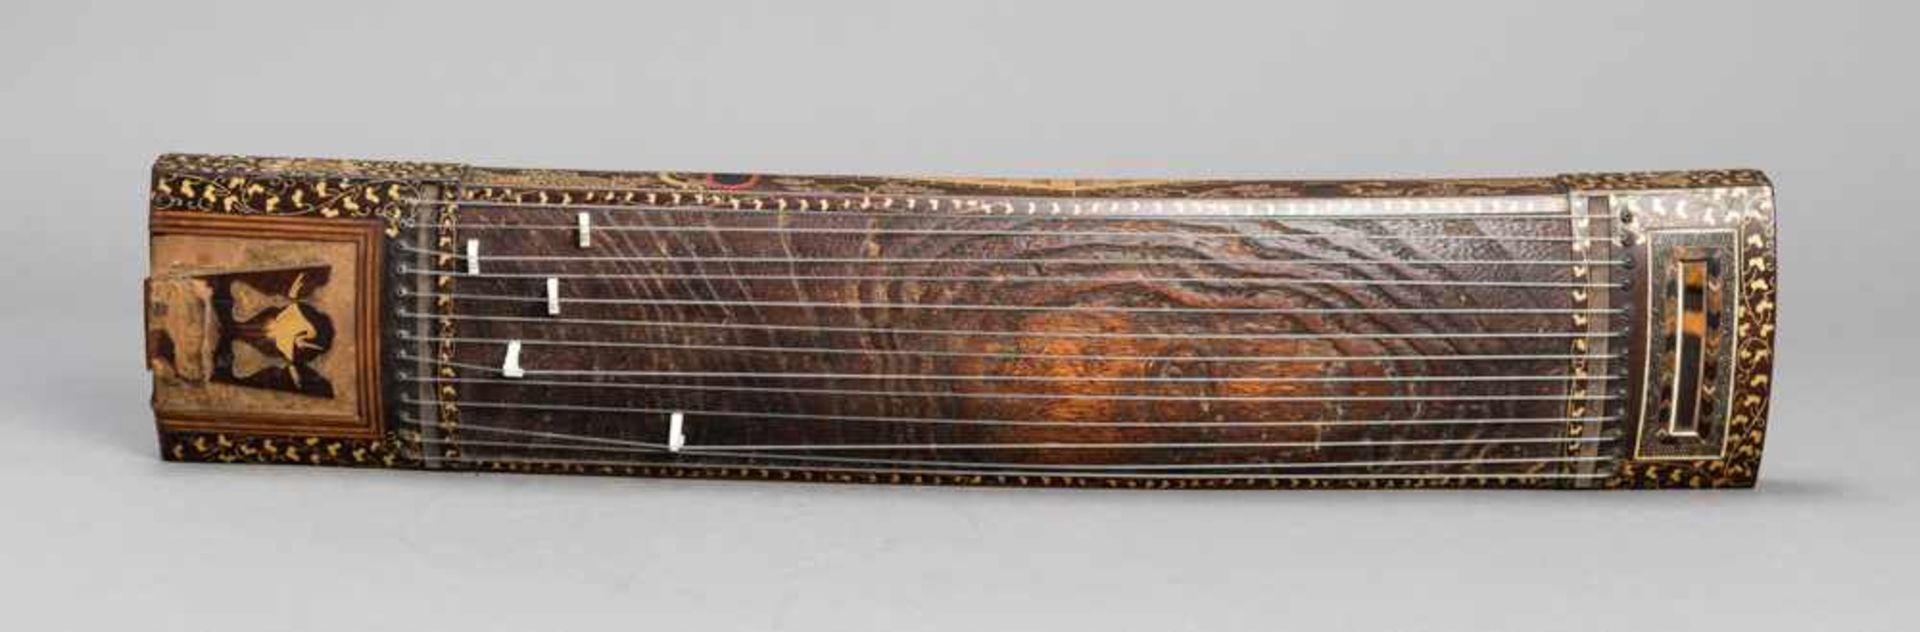 A FINE LACQUERED KOTO Wood, lacquer and bone. Japan, 19th centuryA traditional thirteen-string - Image 6 of 7